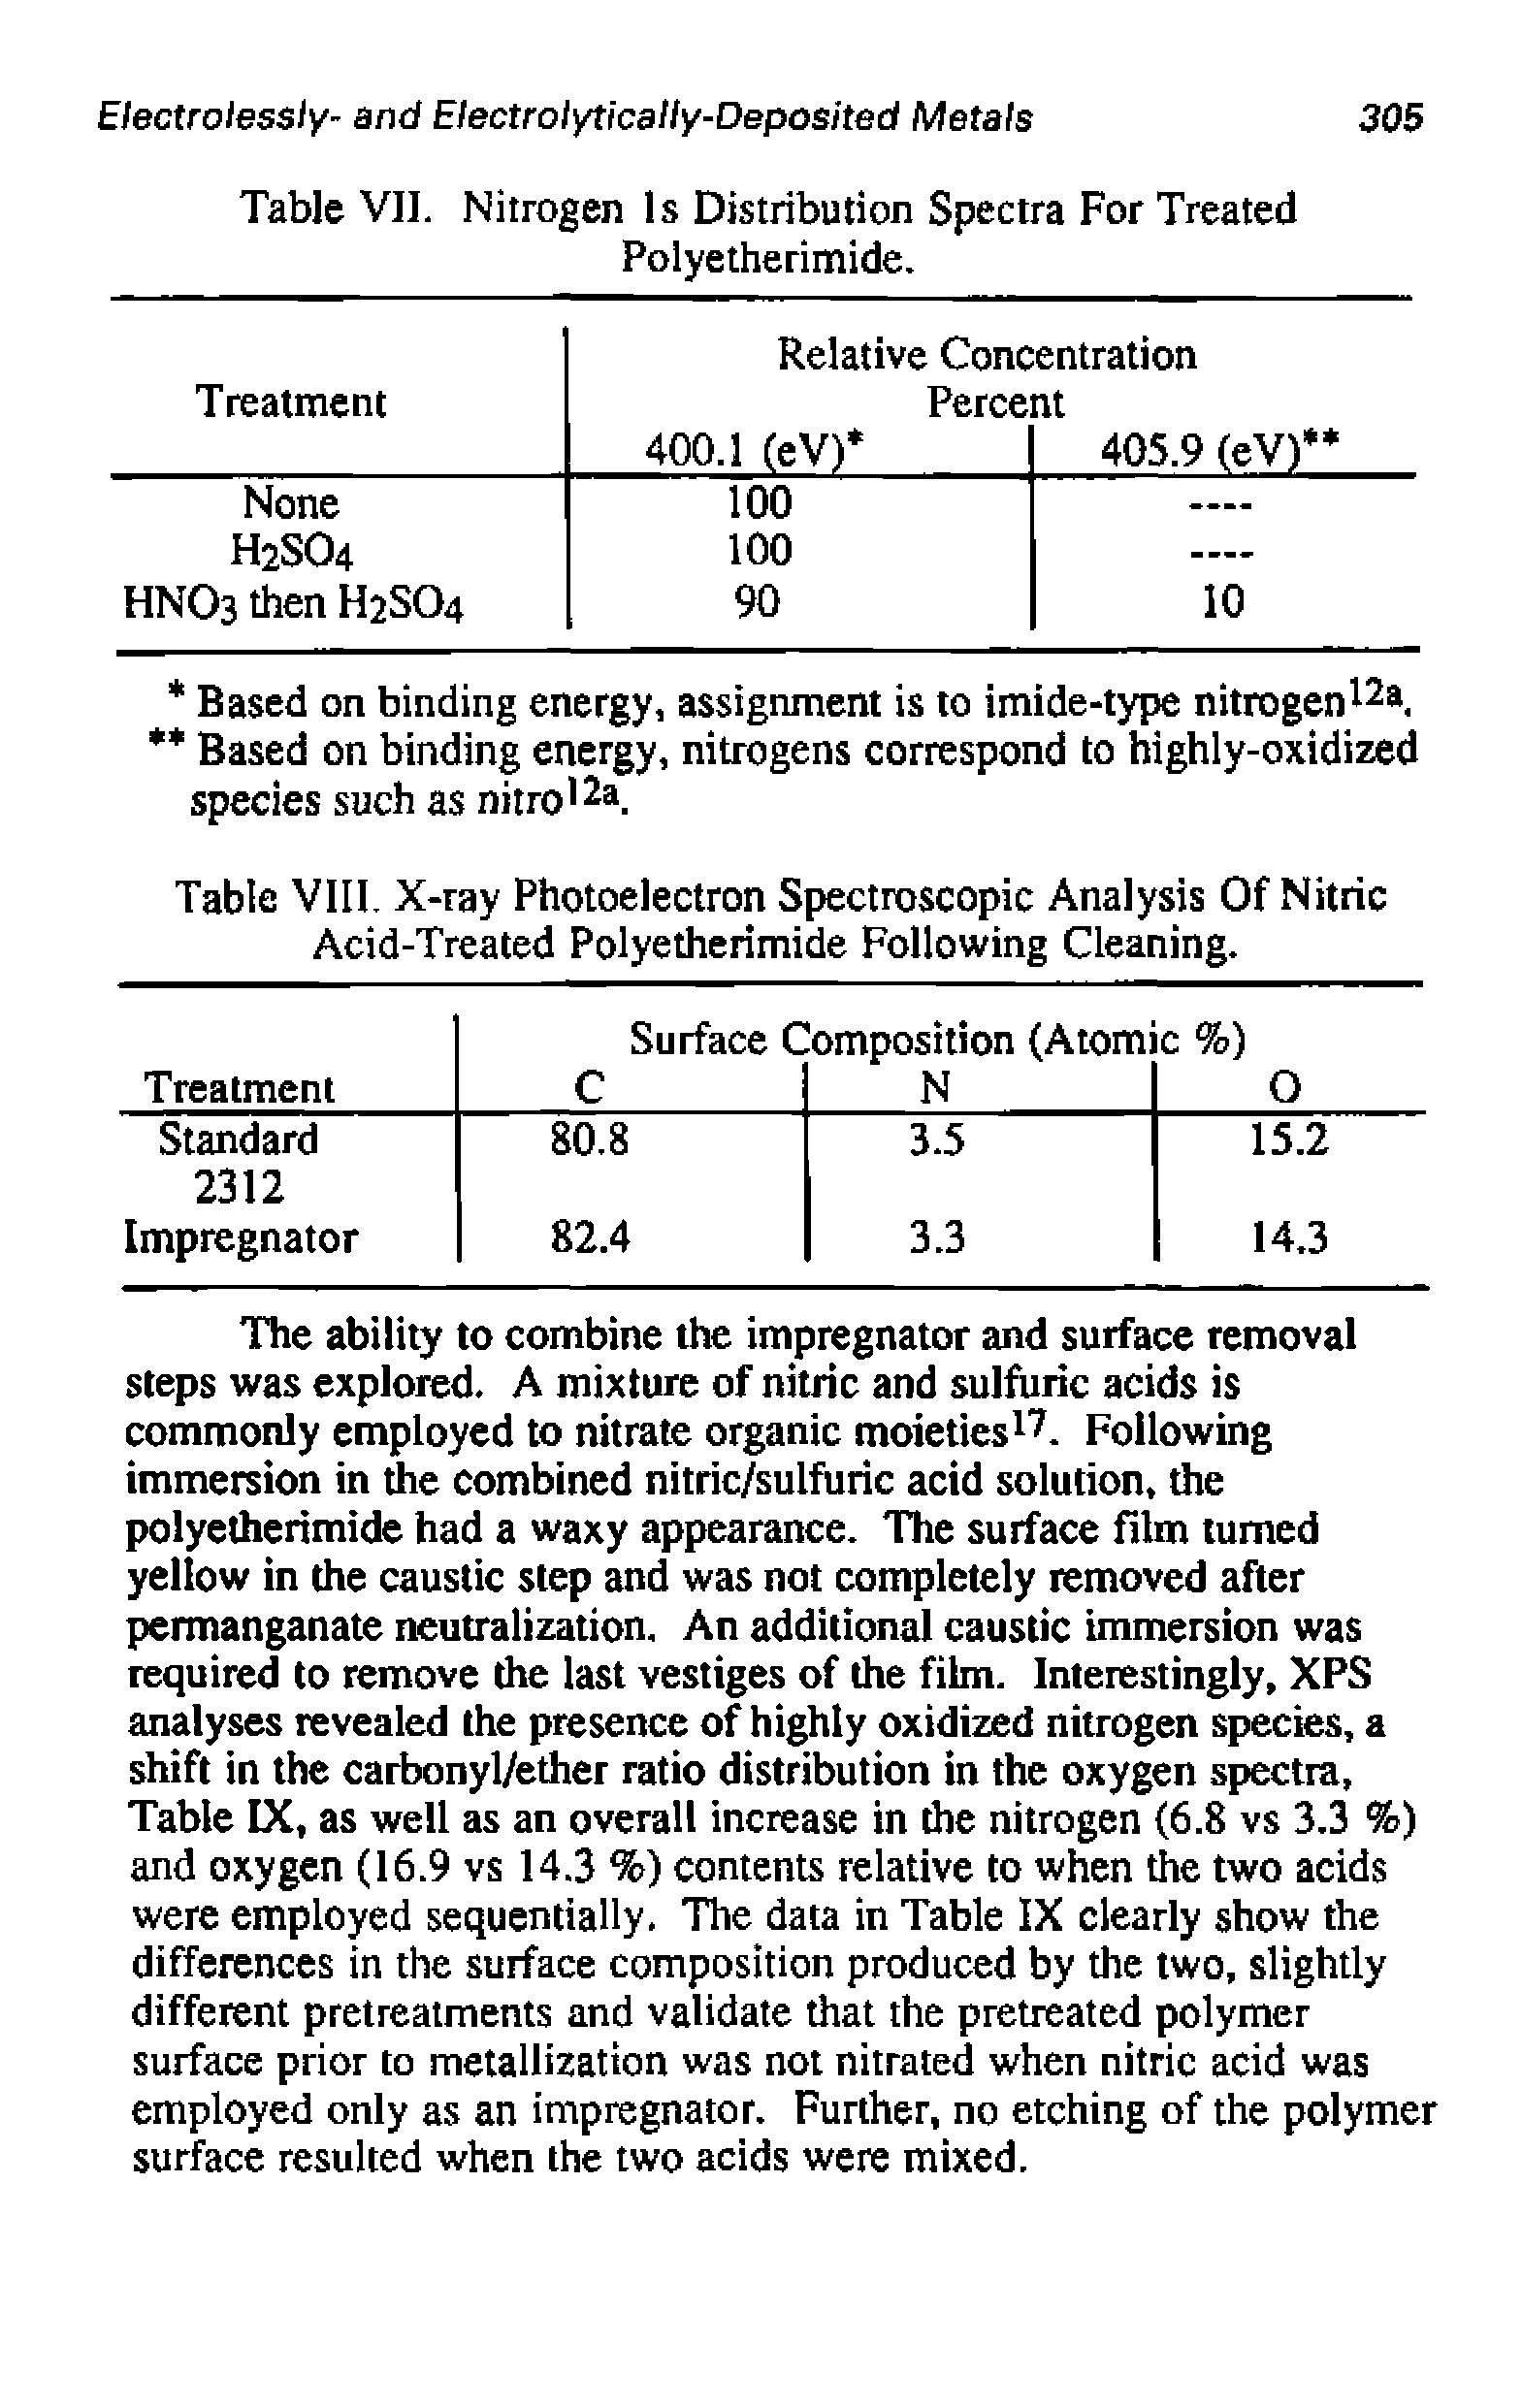 Table VIII. X-ray Photoelectron Spectroscopic Analysis Of Nitric Acid-Treated Polyetherimide Following Cleaning.